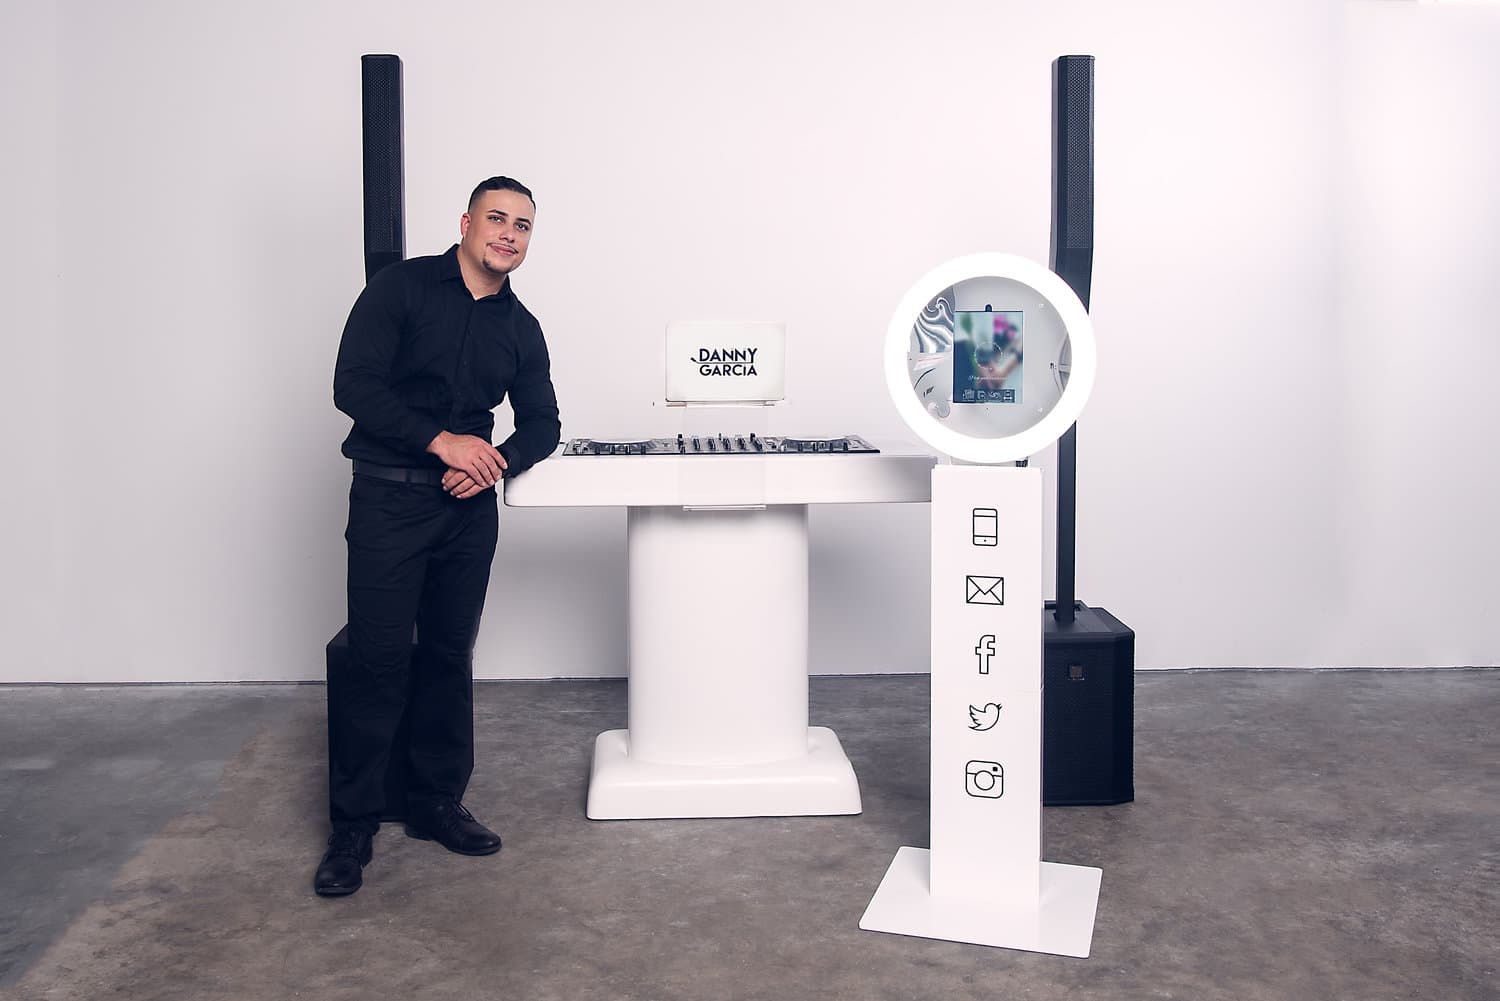 man stands dressed in all black leaning against white dj booth with photo booth stand in front of it and two speakers on each side of booth